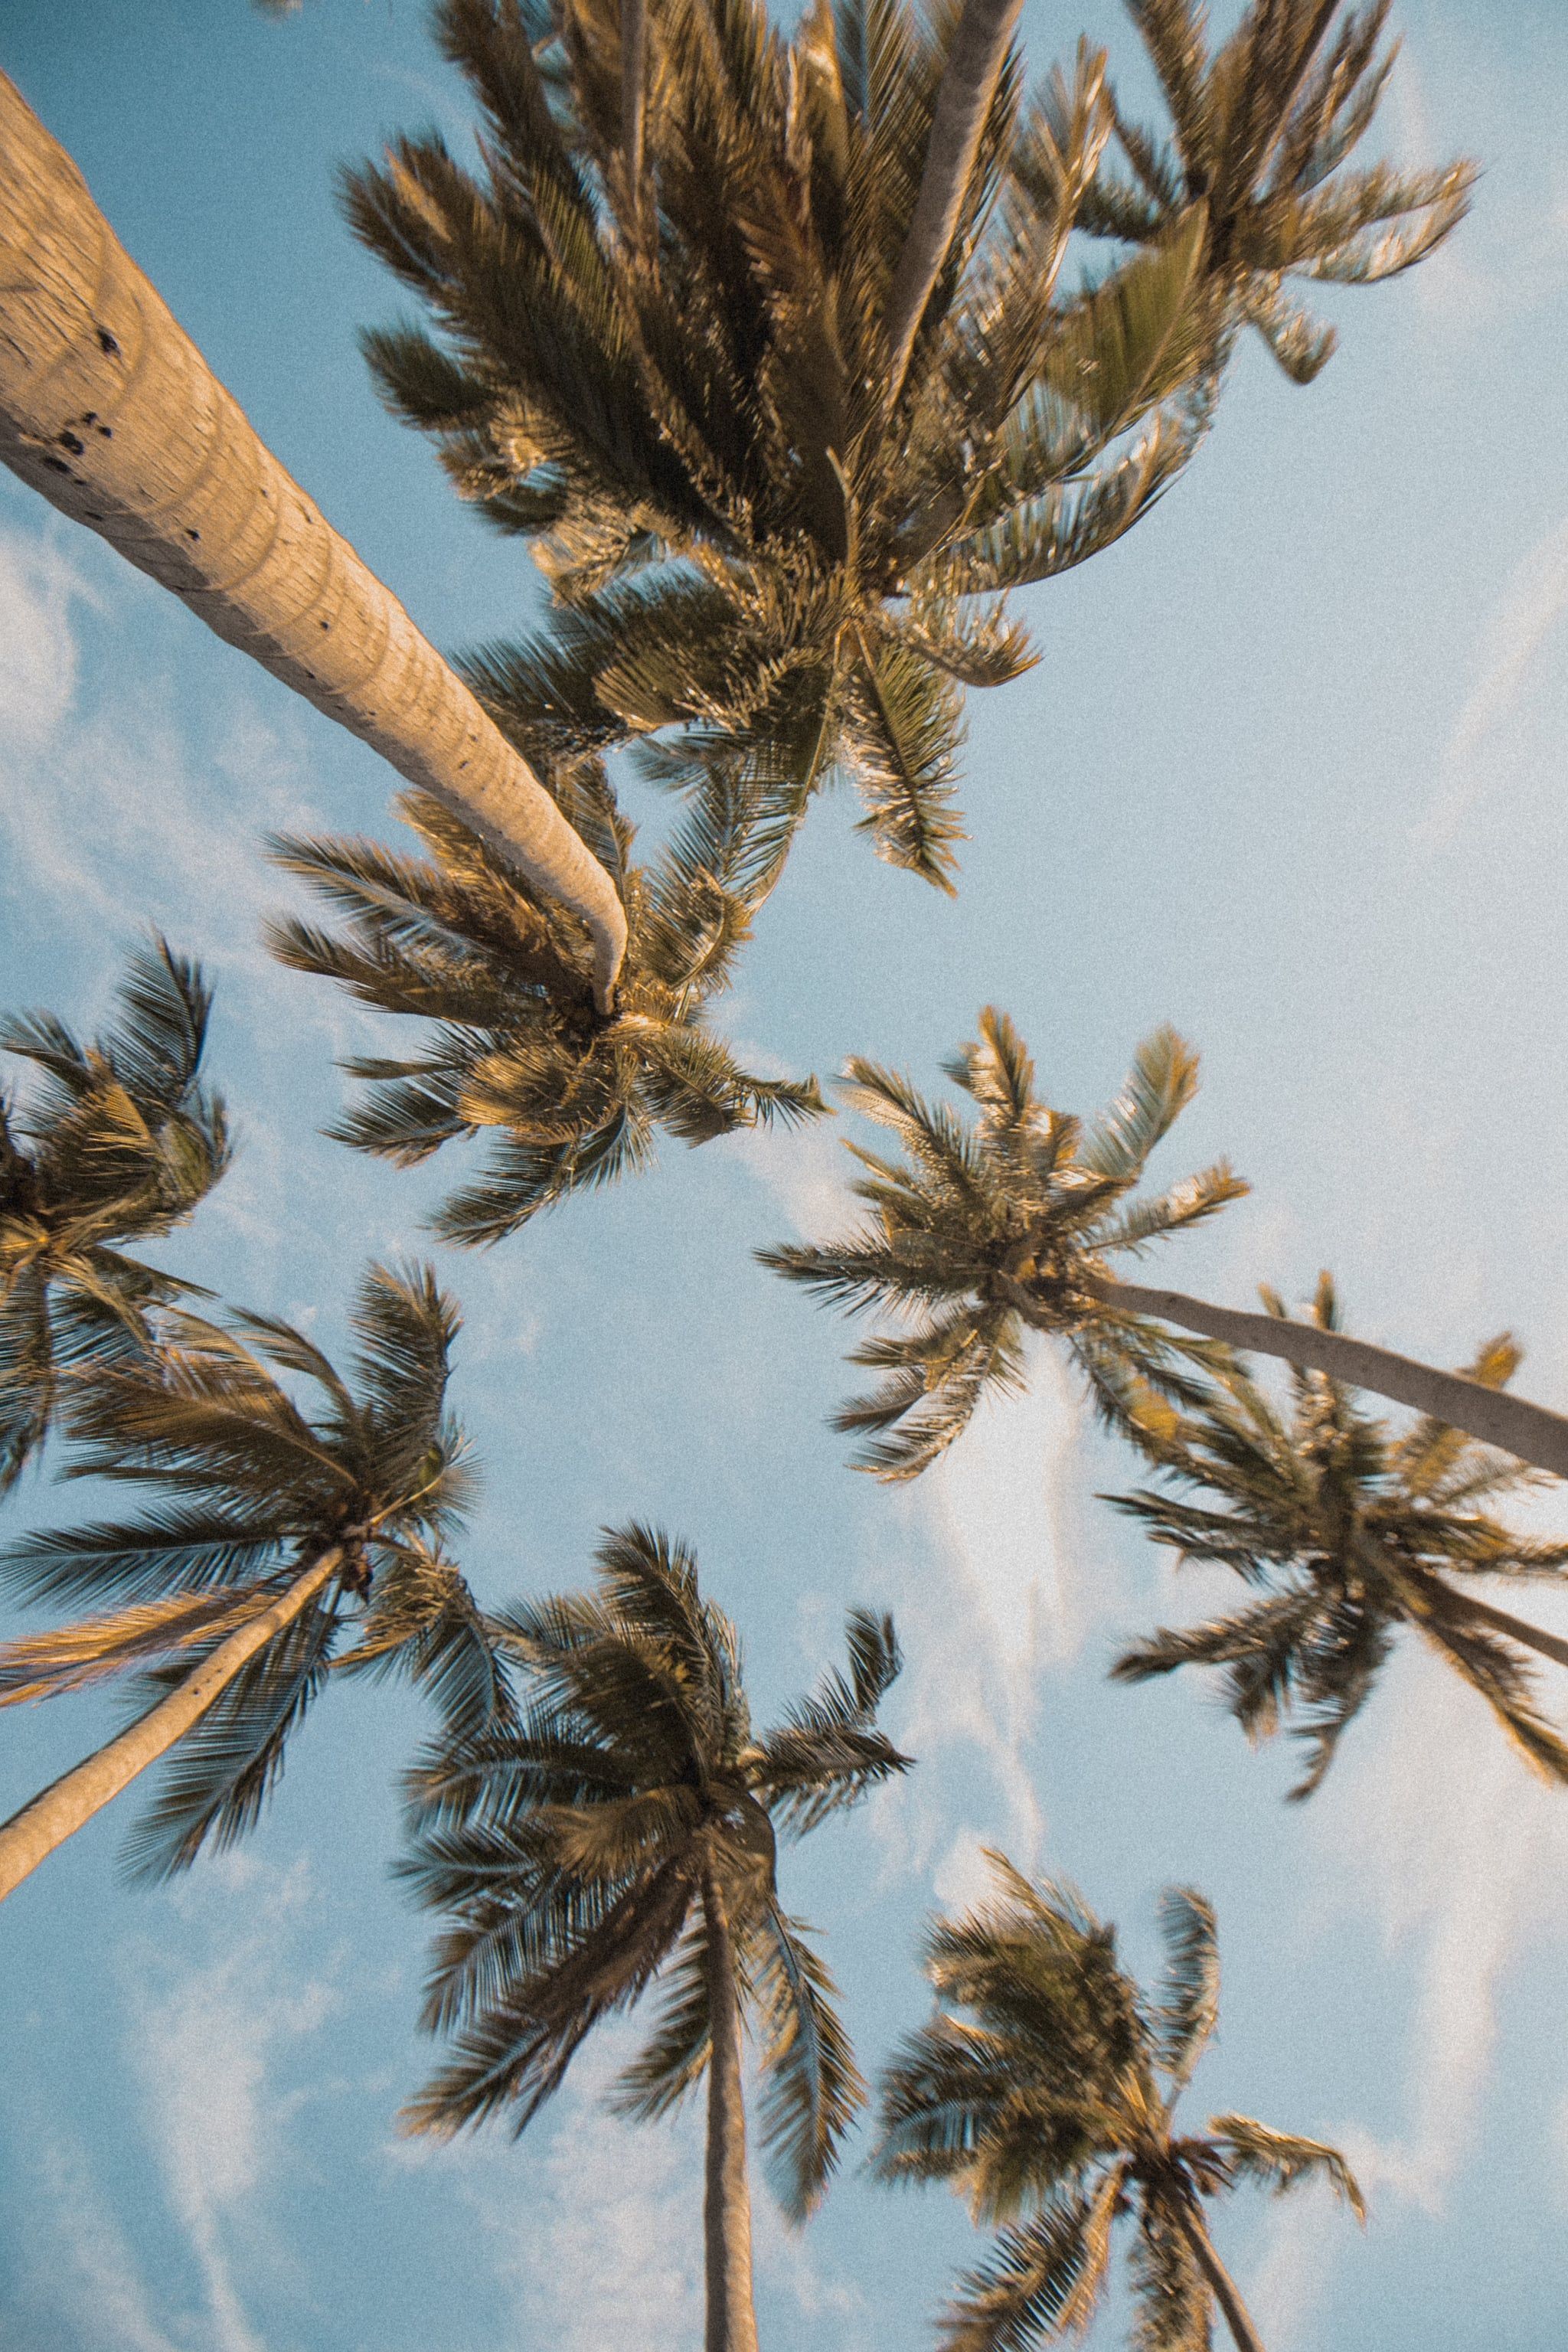 A photo of palm trees from the ground looking up at the sky. - Plants, palm tree, TikTok, June, bright, beautiful, summer, iOS 17